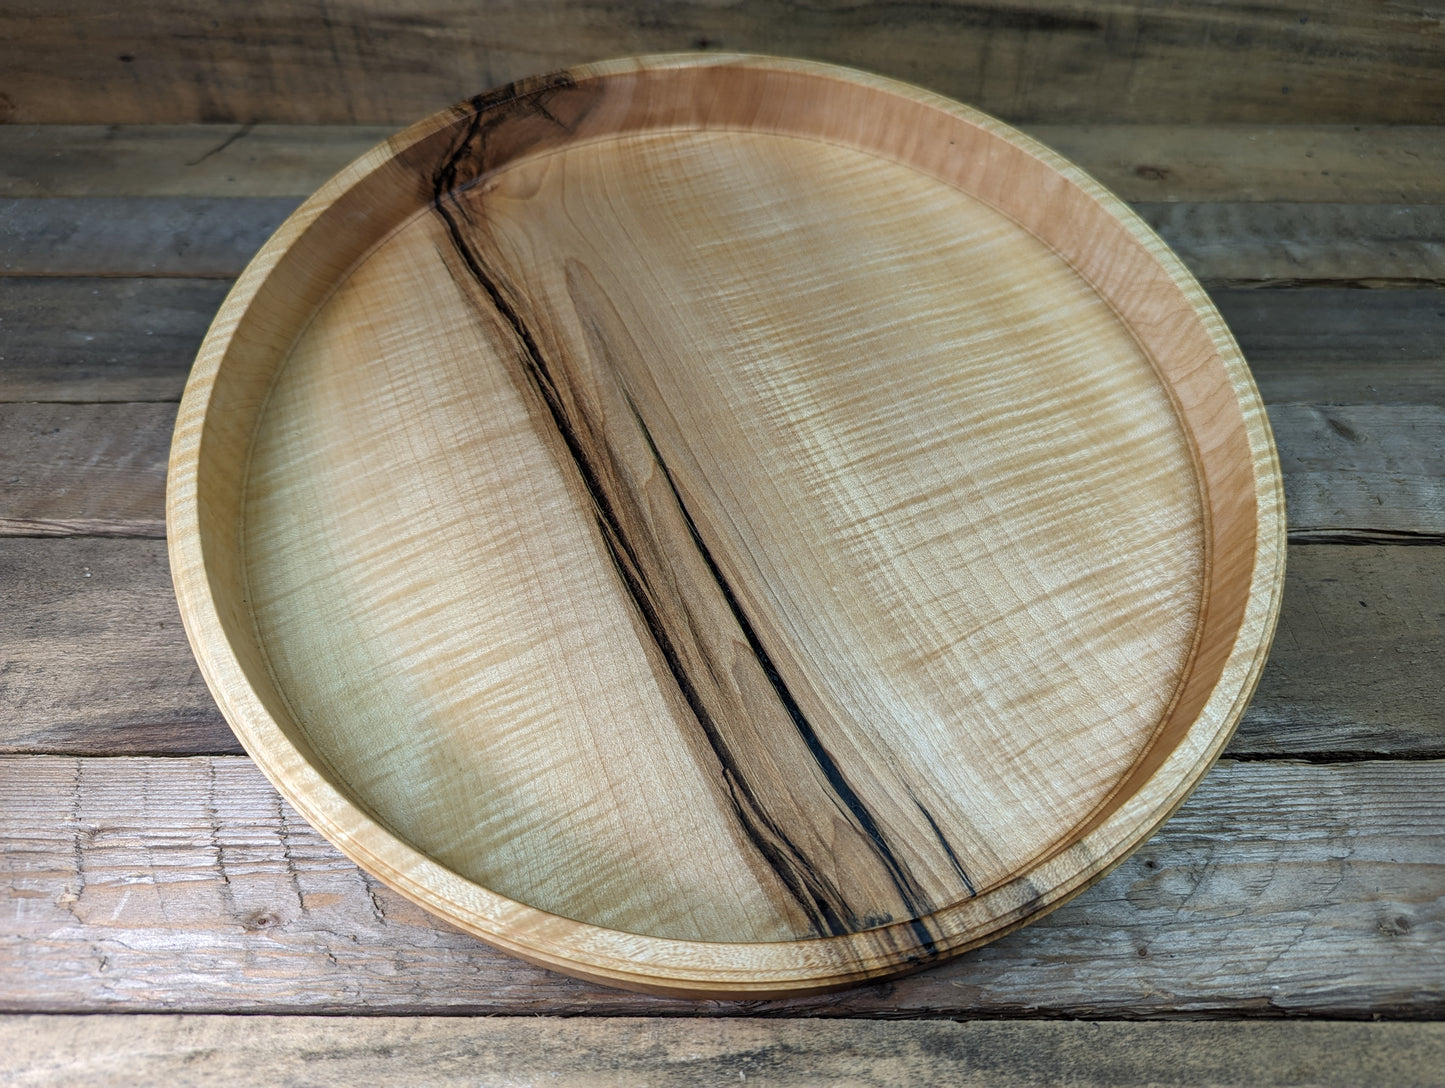 Figured maple serving tray